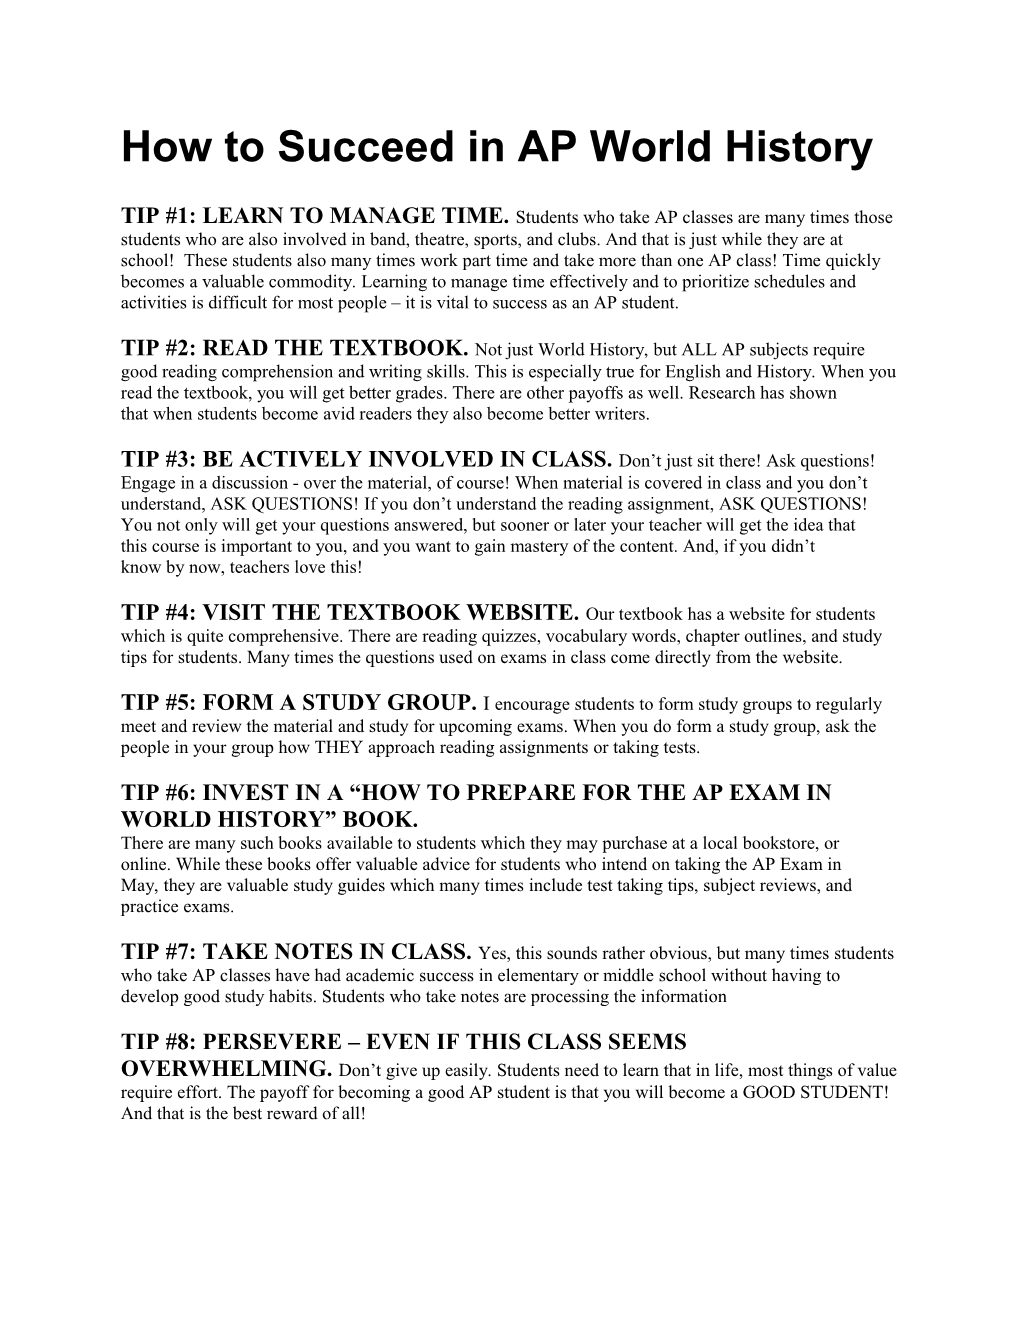 How to Succeed in AP World History